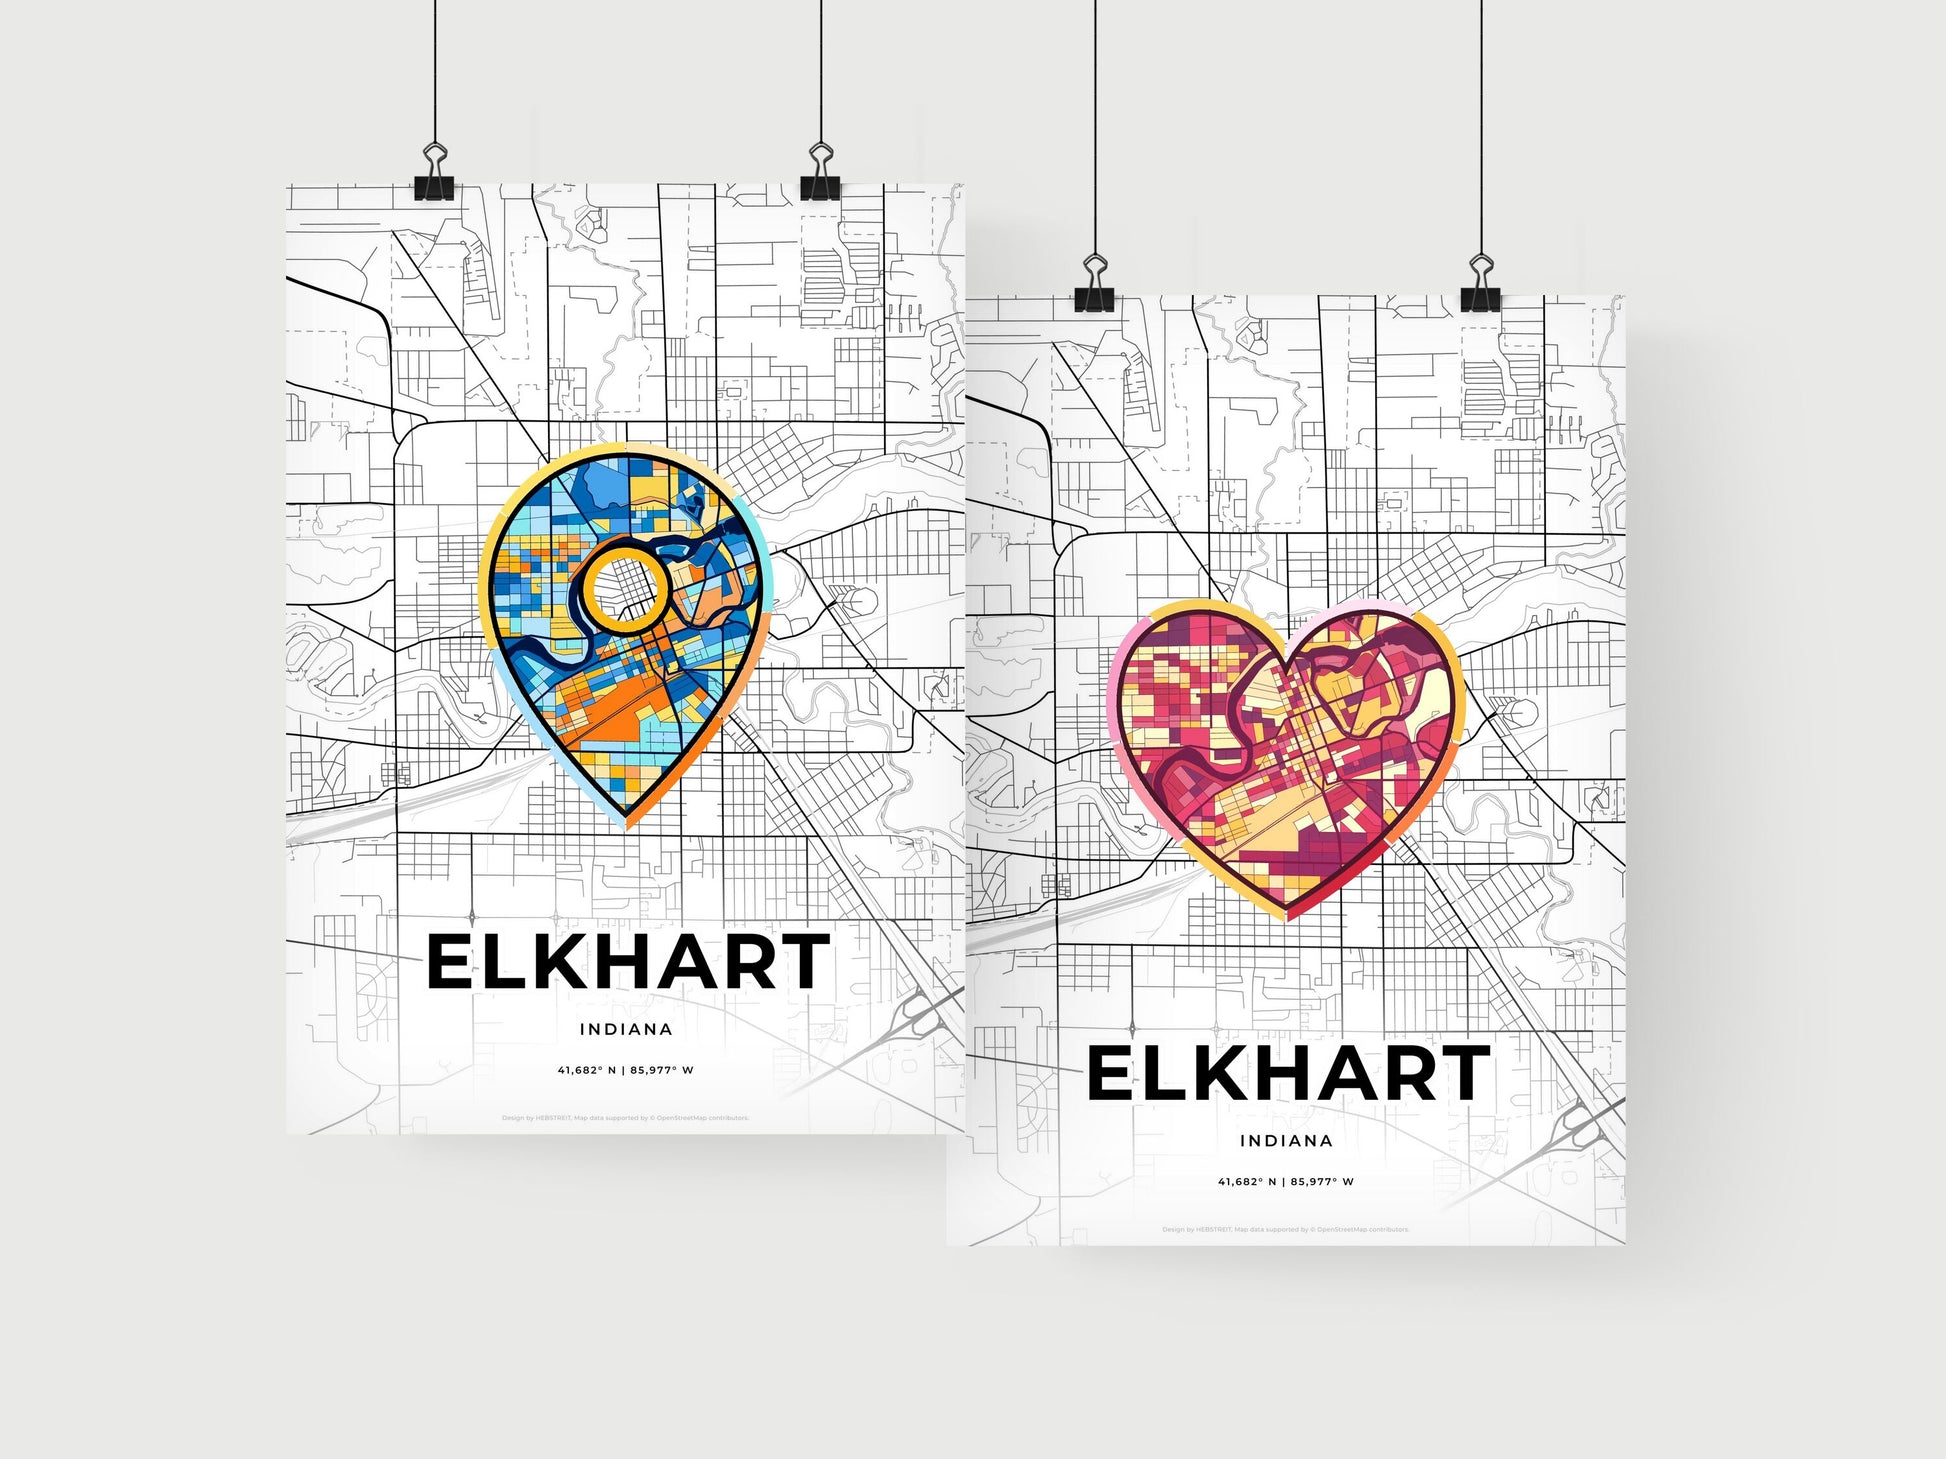 ELKHART INDIANA minimal art map with a colorful icon. Where it all began, Couple map gift.